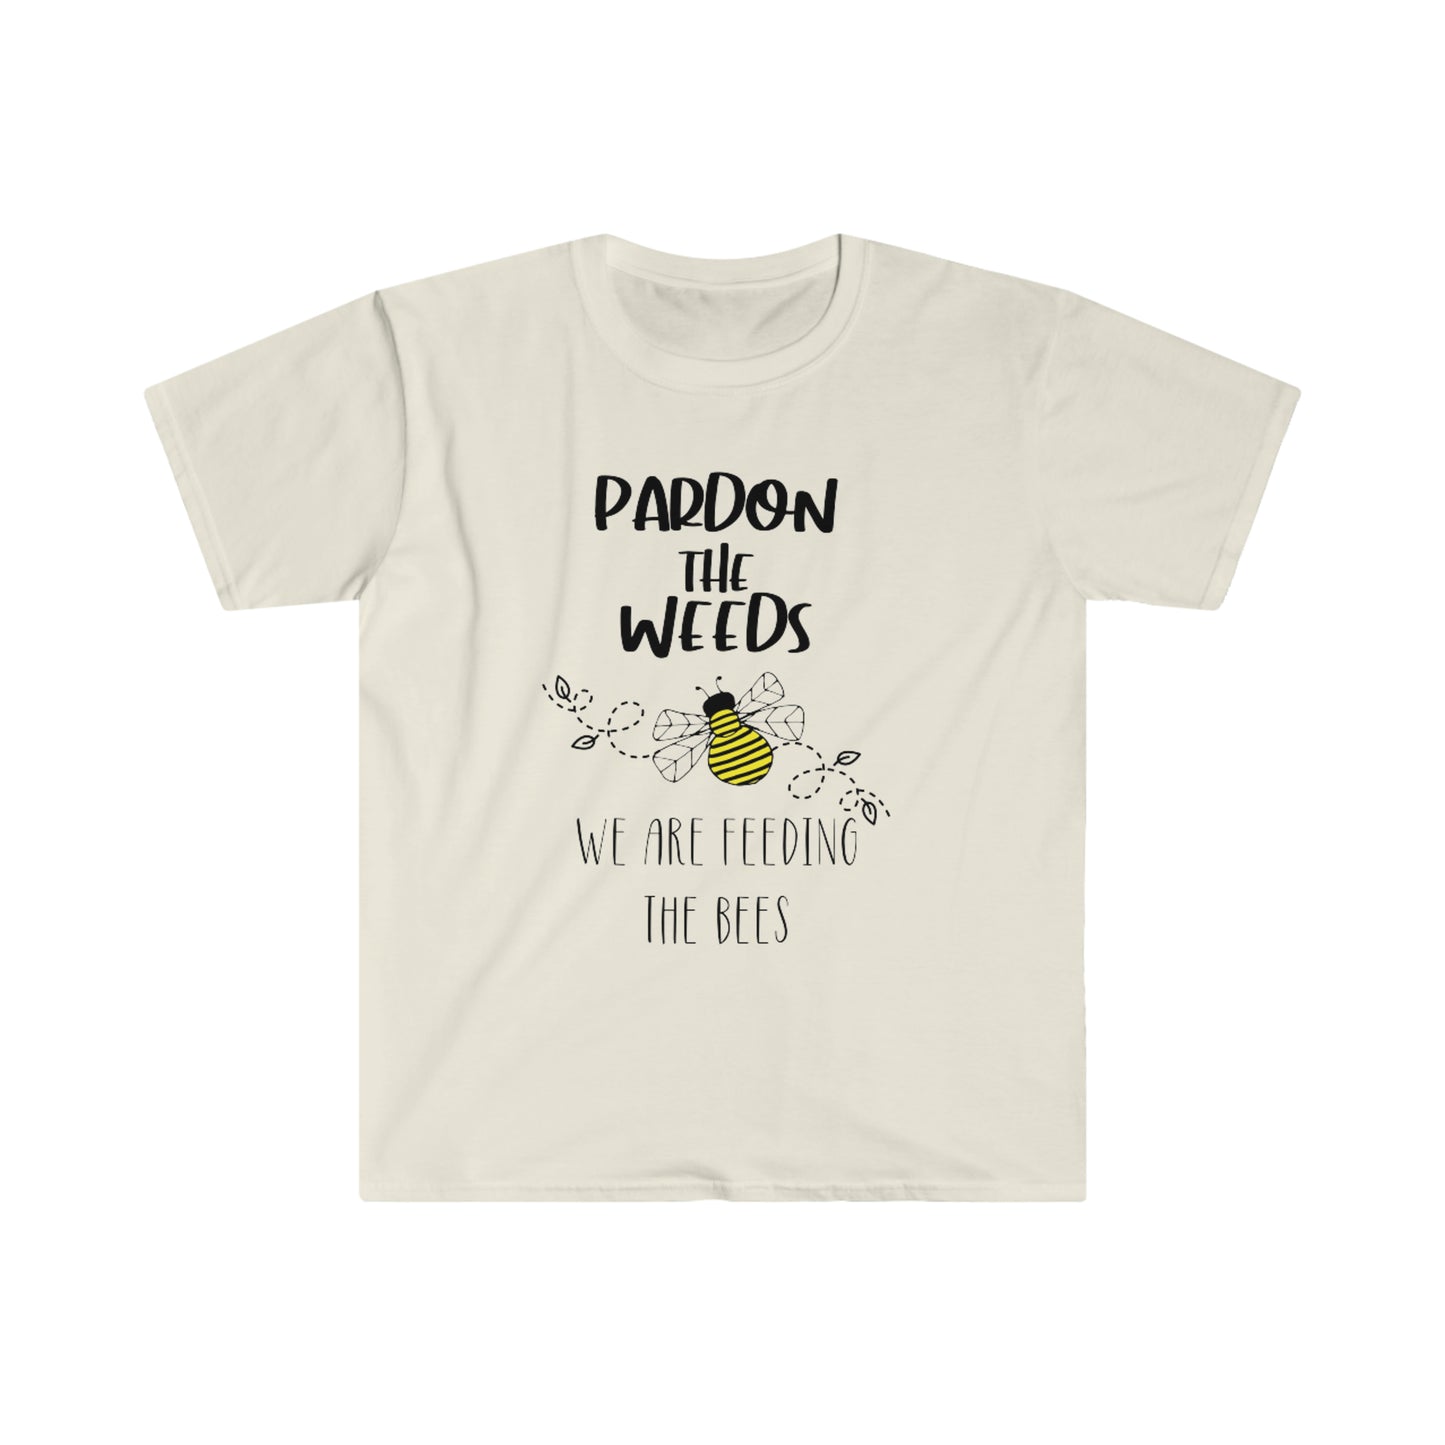 Pardon the weeds we are feeding the bees - Unisex Softstyle T-Shirt